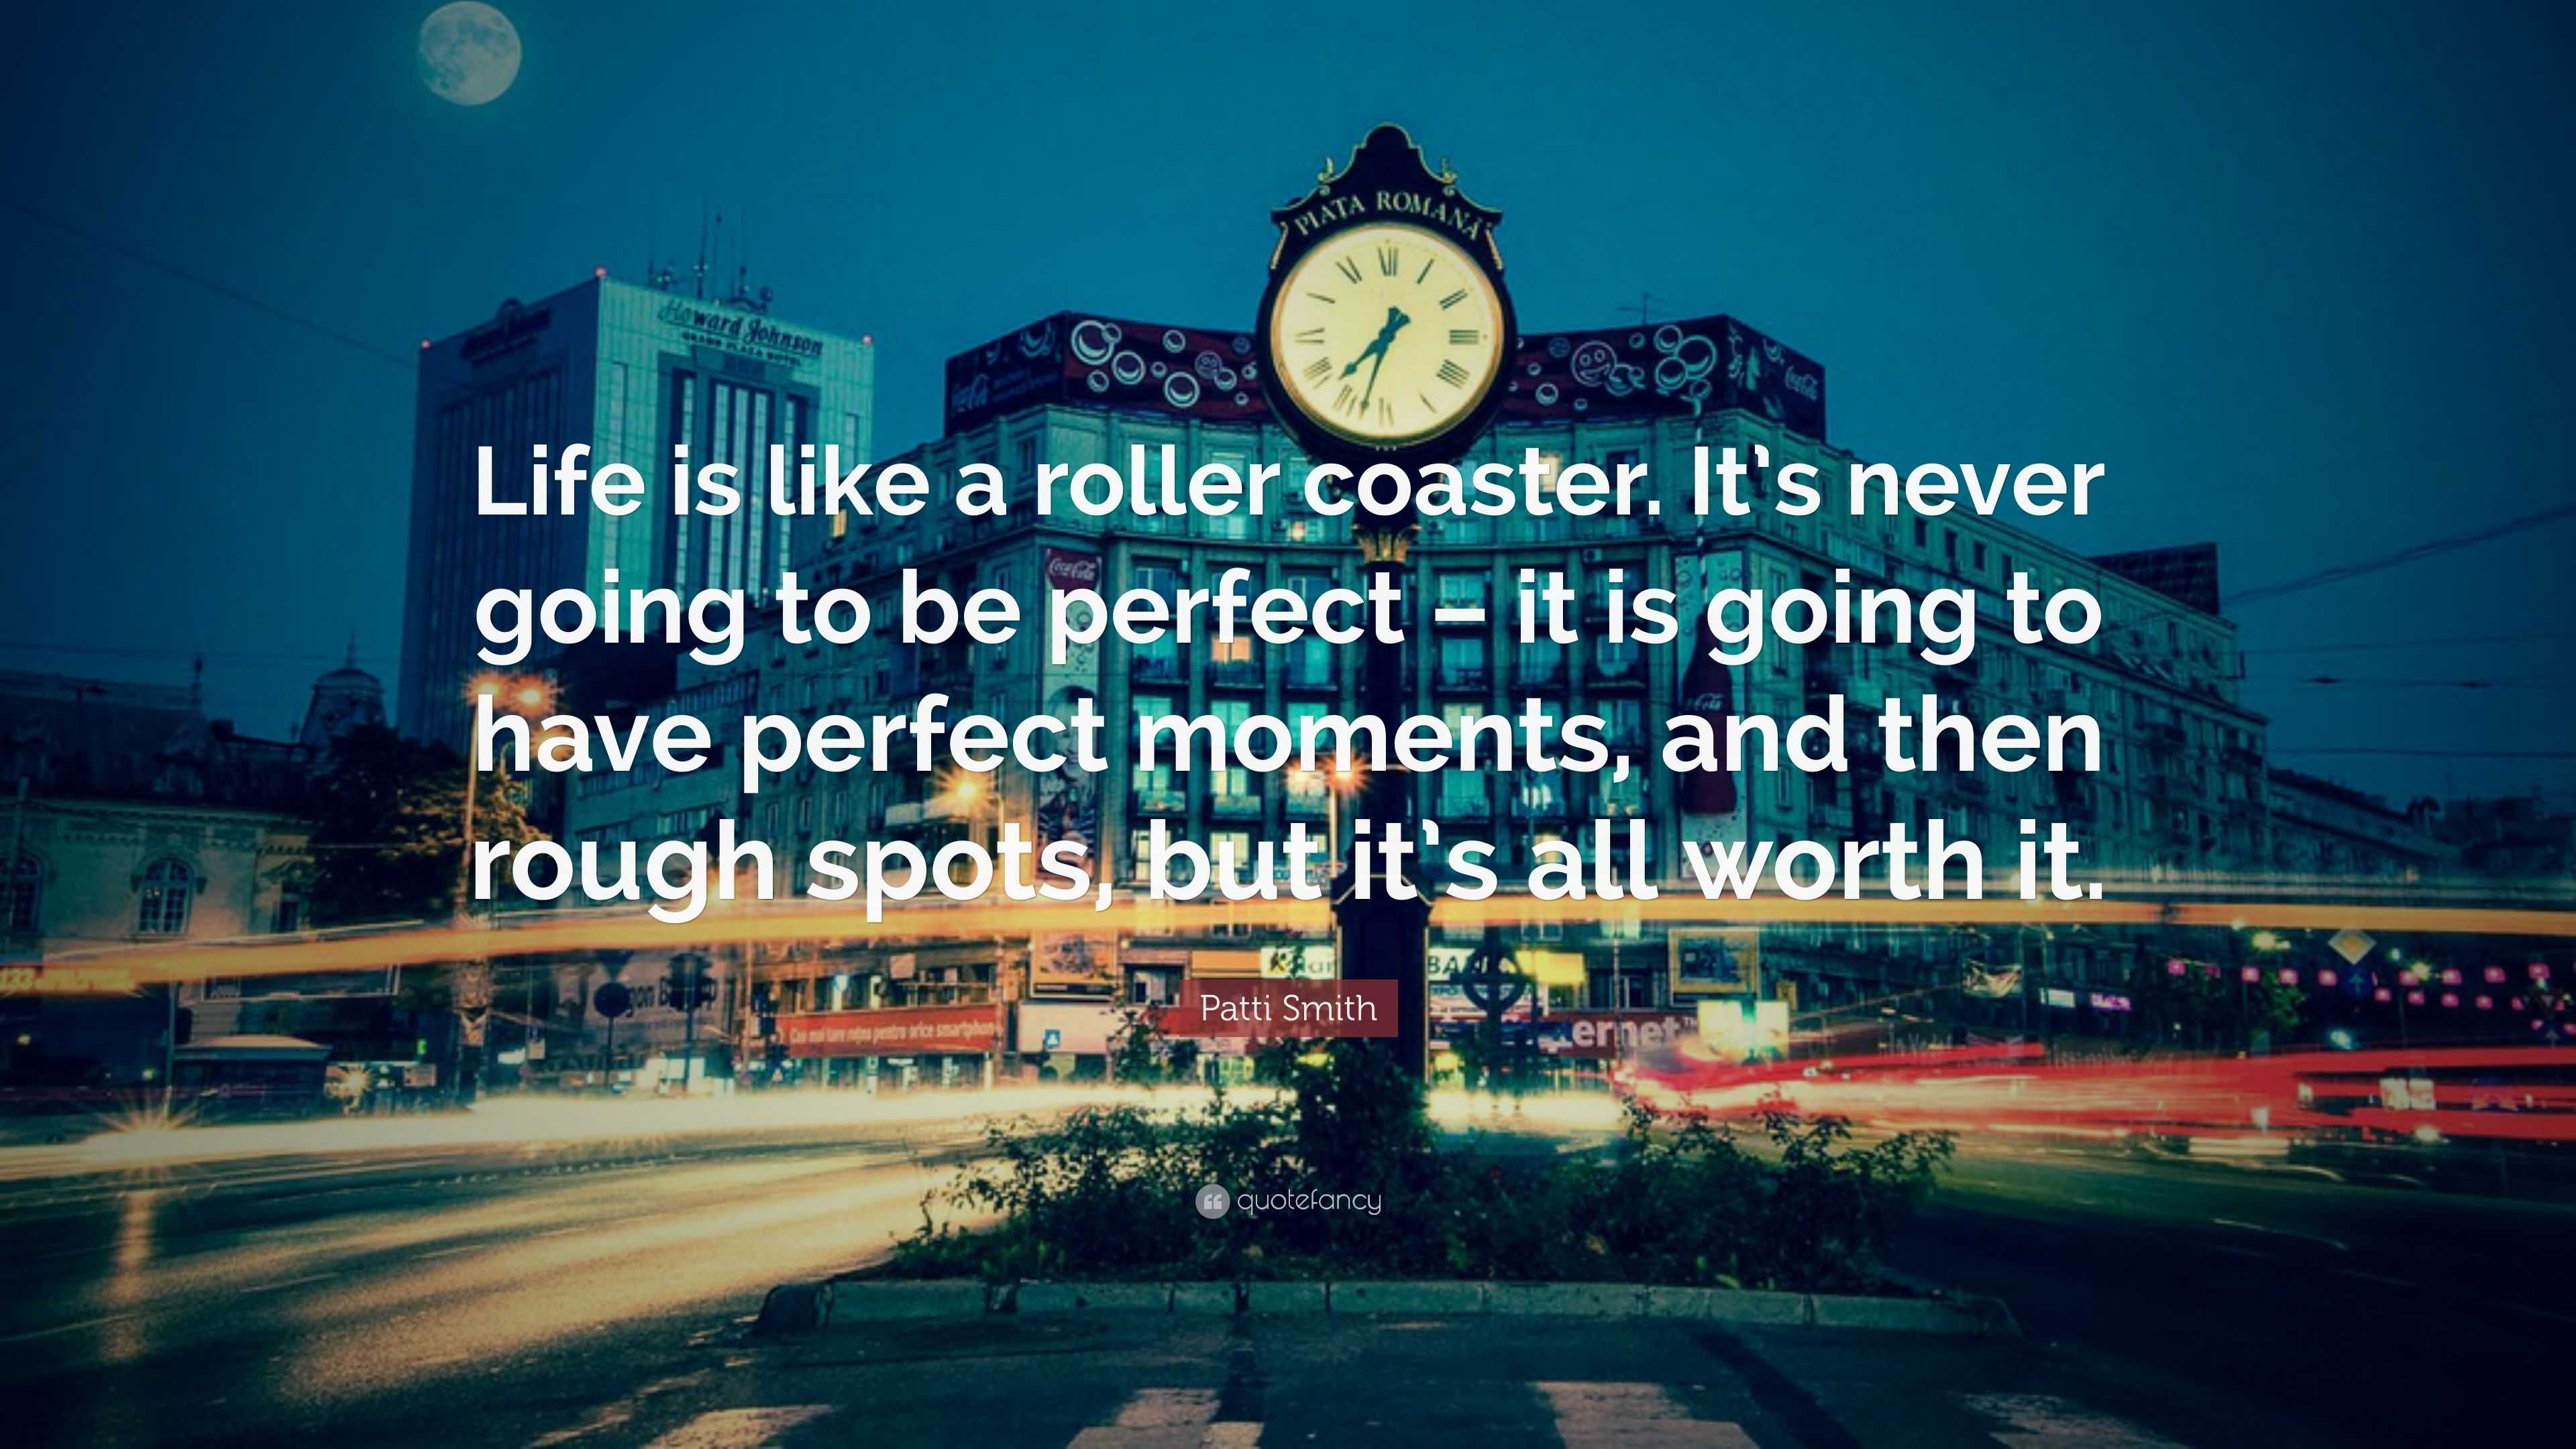 Patti Smith Quote Life Is Like A Roller Coaster It S Never Going To Be Perfect It Is Going To Have Perfect Moments And Then Rough Spot